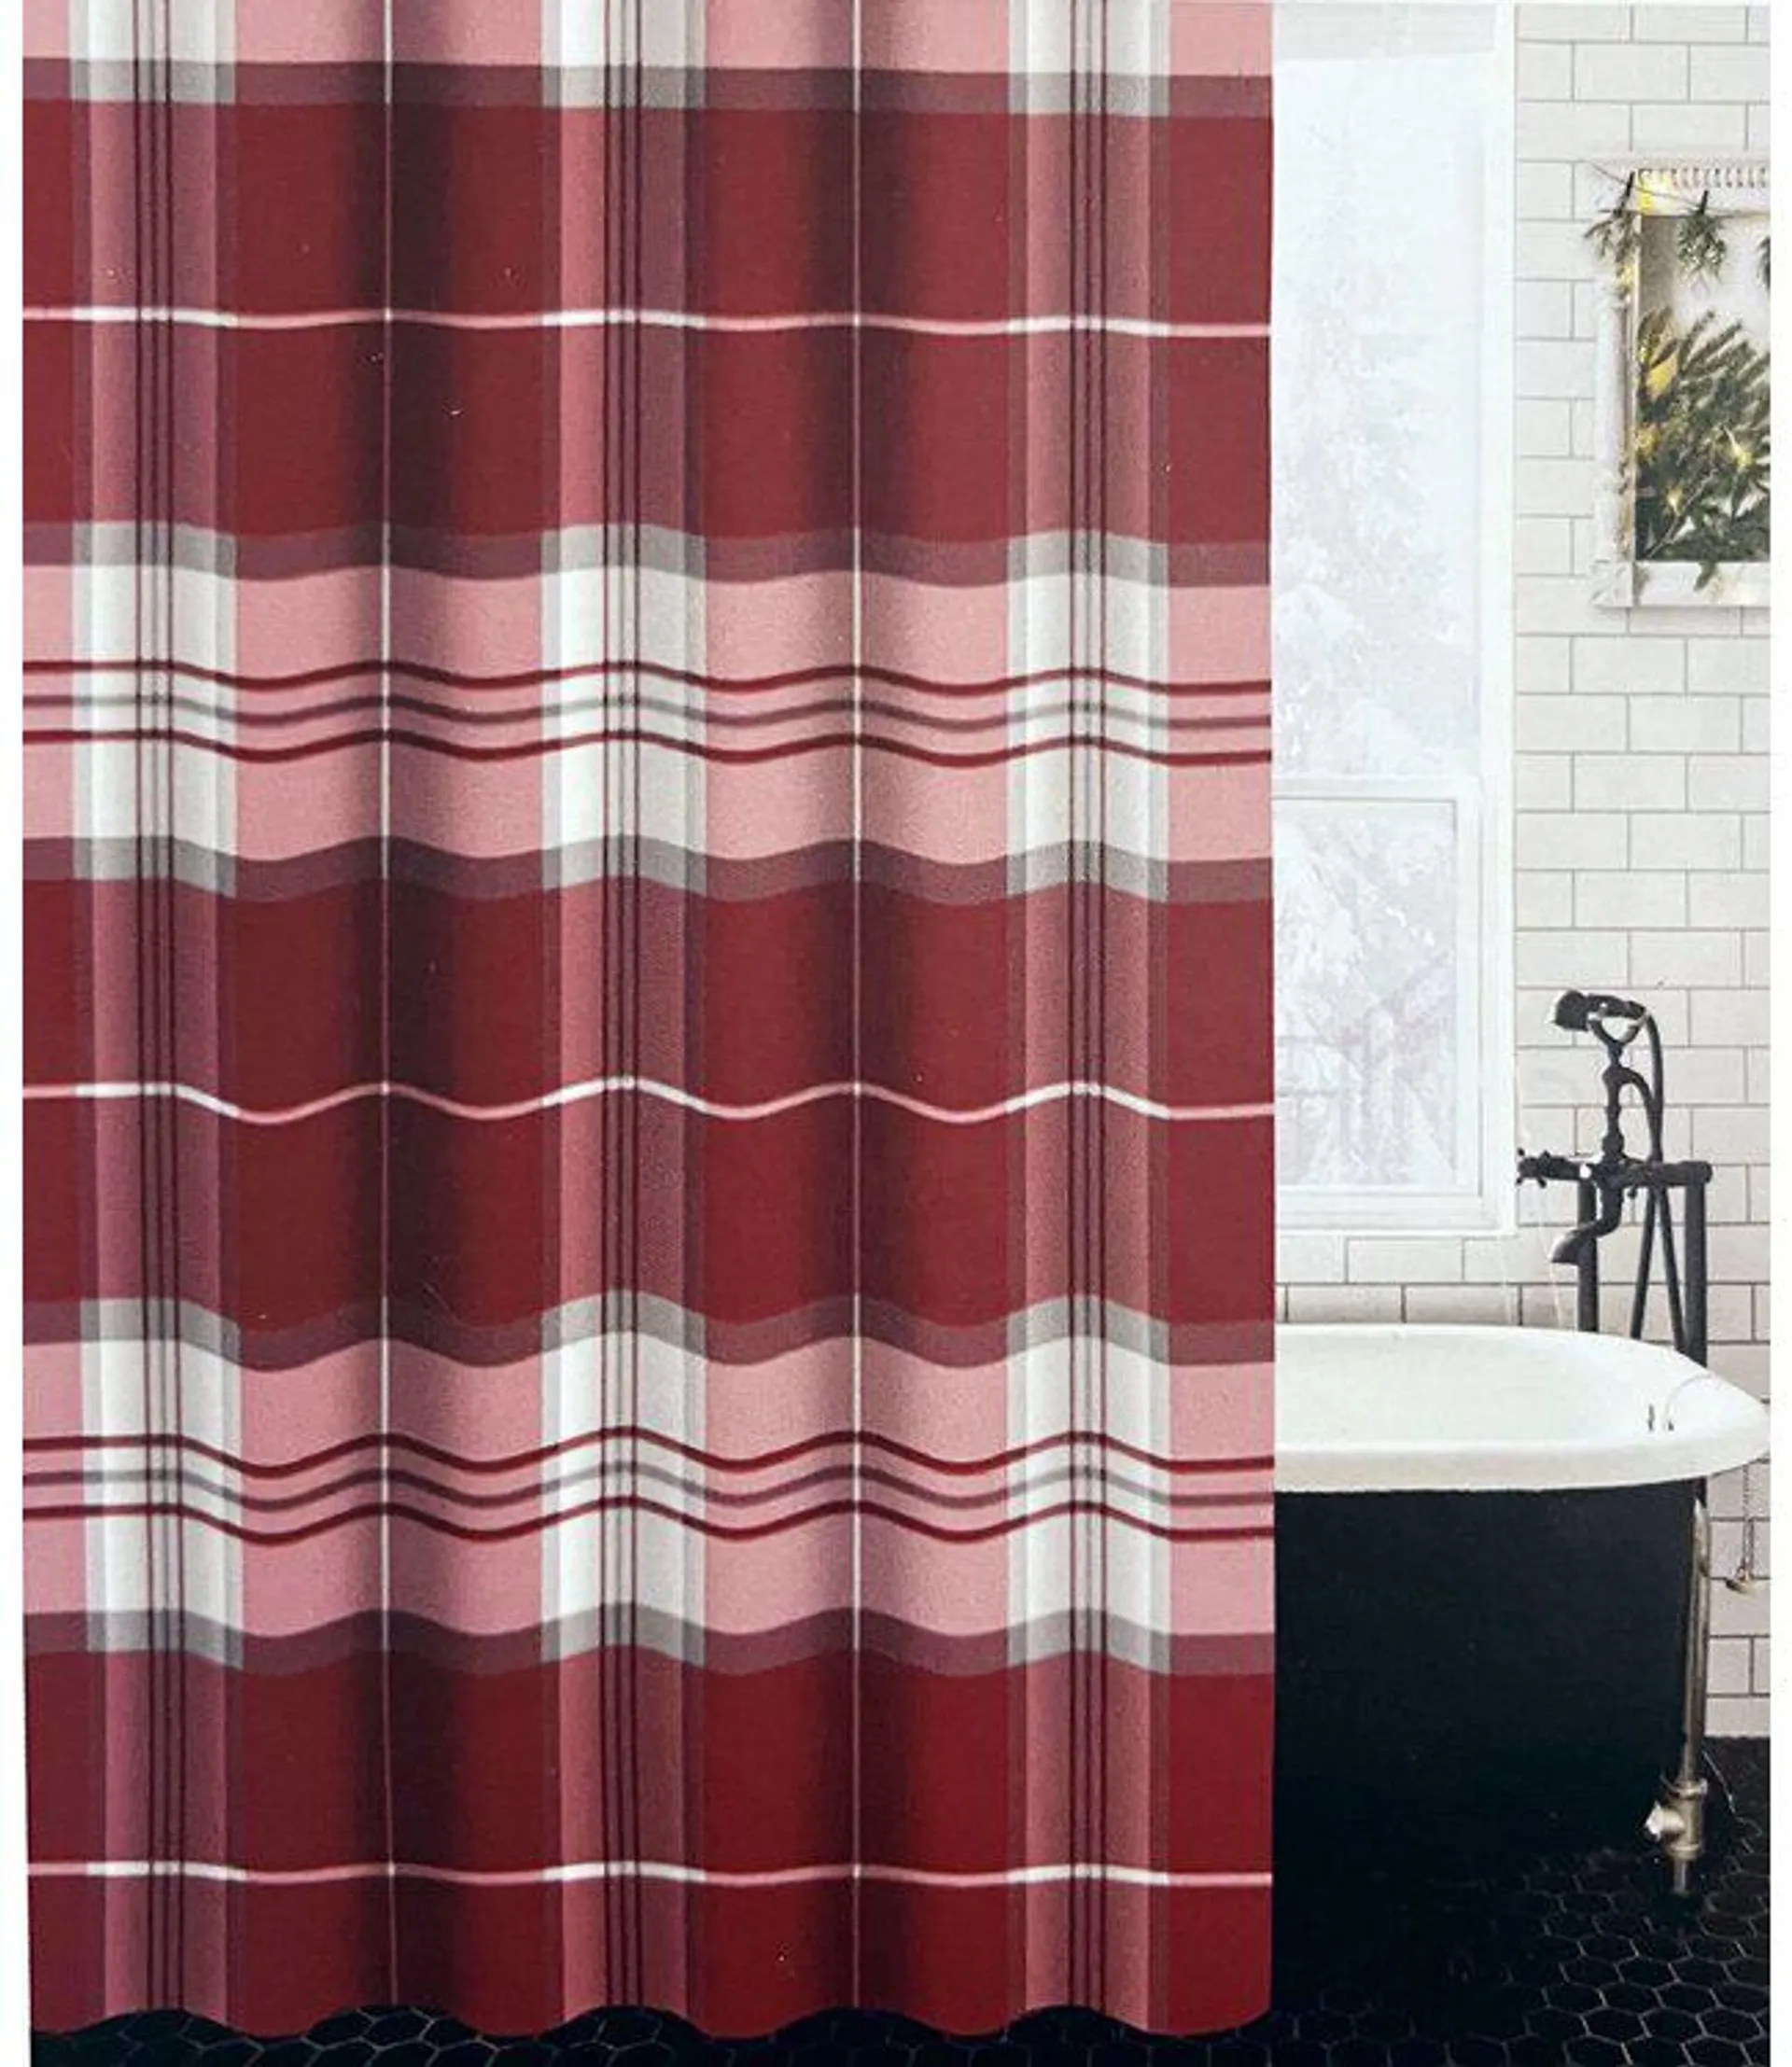 WOVEN PRINTED HOLIDAY SHOWER CURTAIN MERRY PLAID